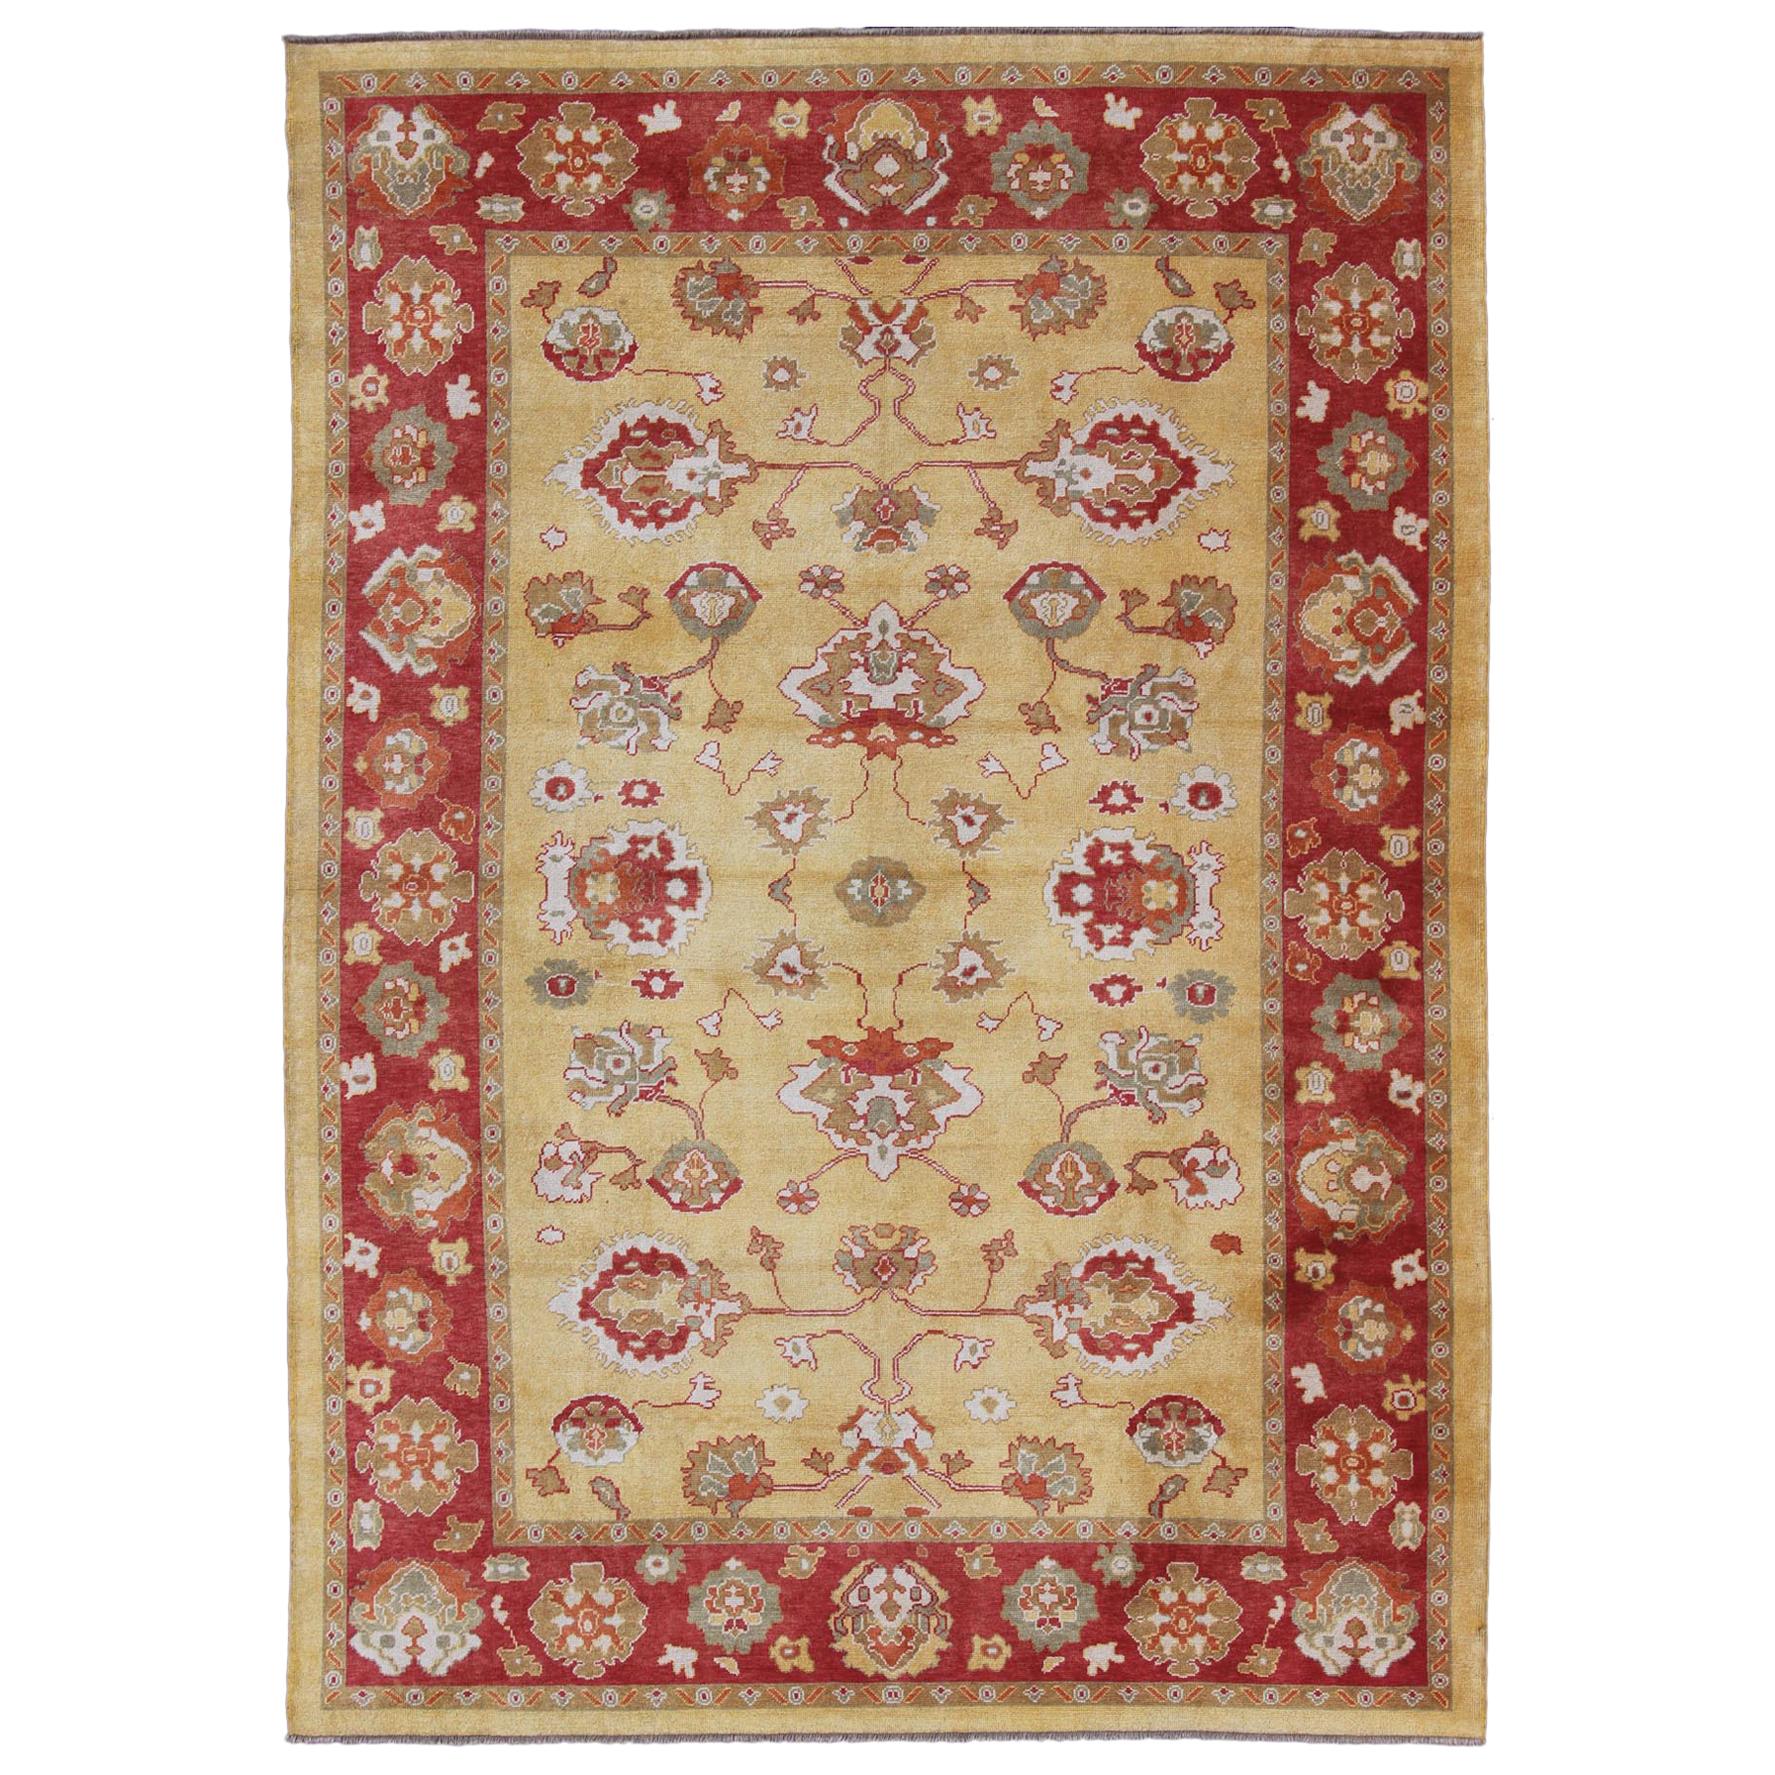 Turkish Oushak Rug with Red and Gold Color Palette and All-Over Flower Design